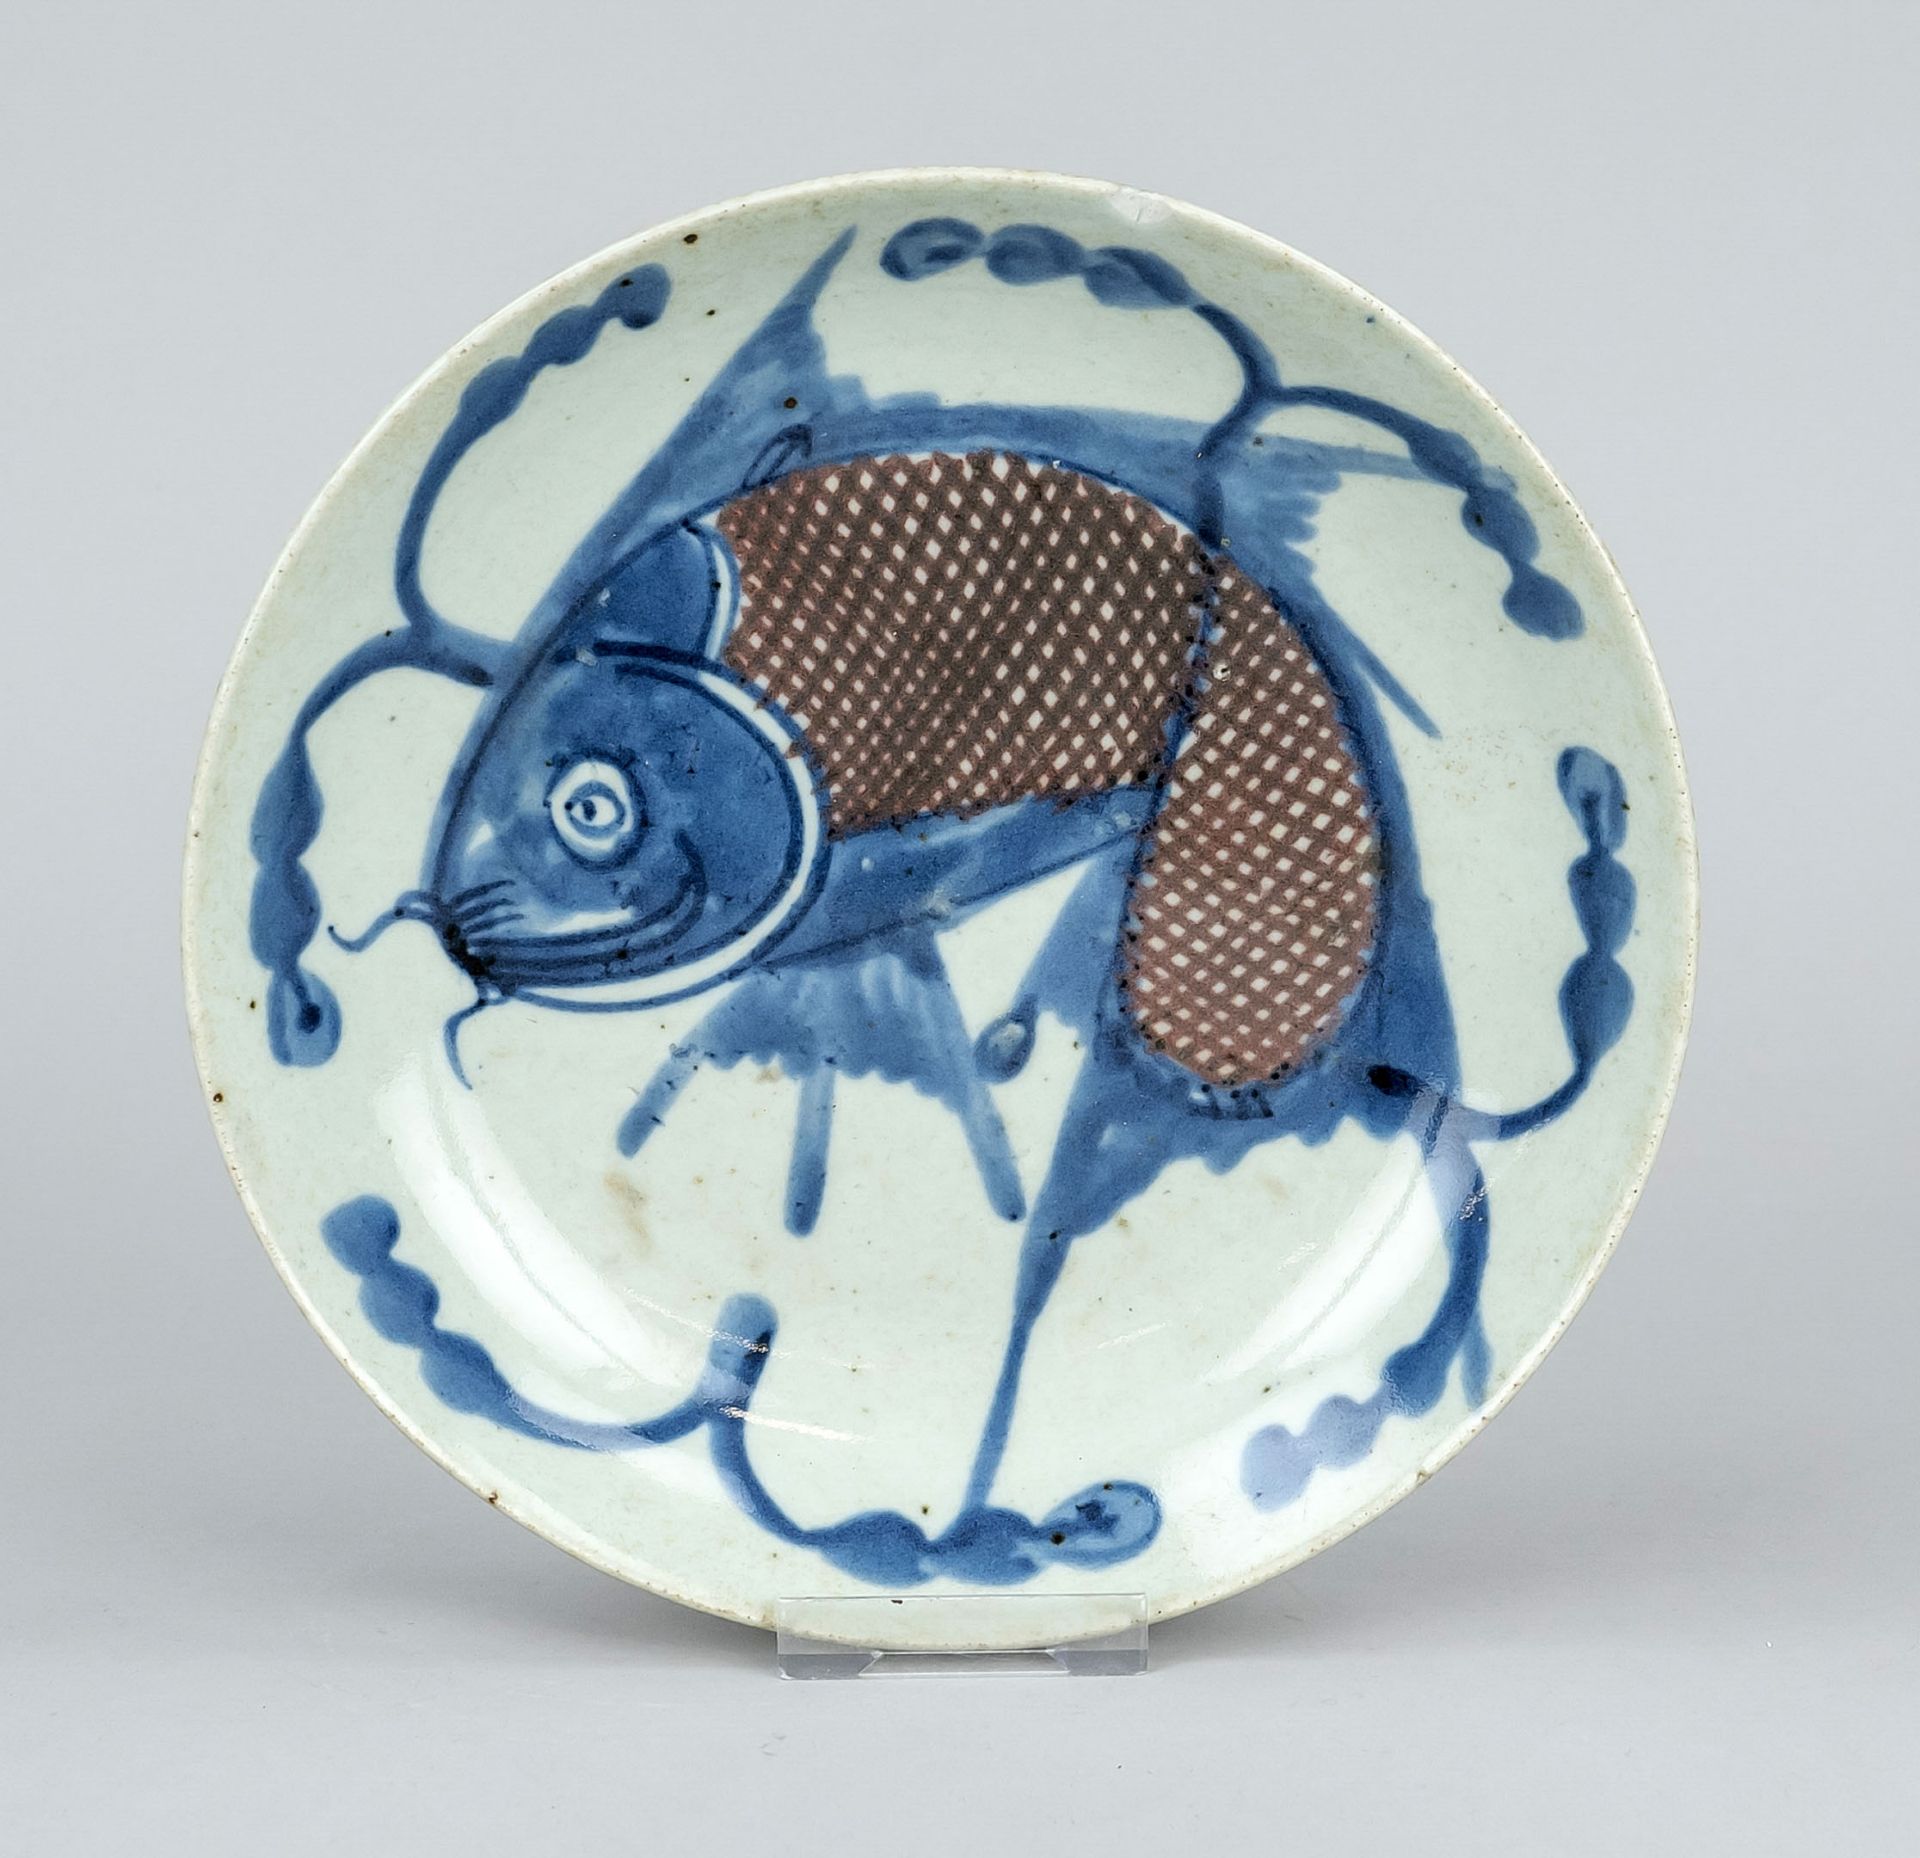 Fish Dish, probably Ming Dynasty(1368-1644) 16th/17th century, porcelain with iron red and cobalt